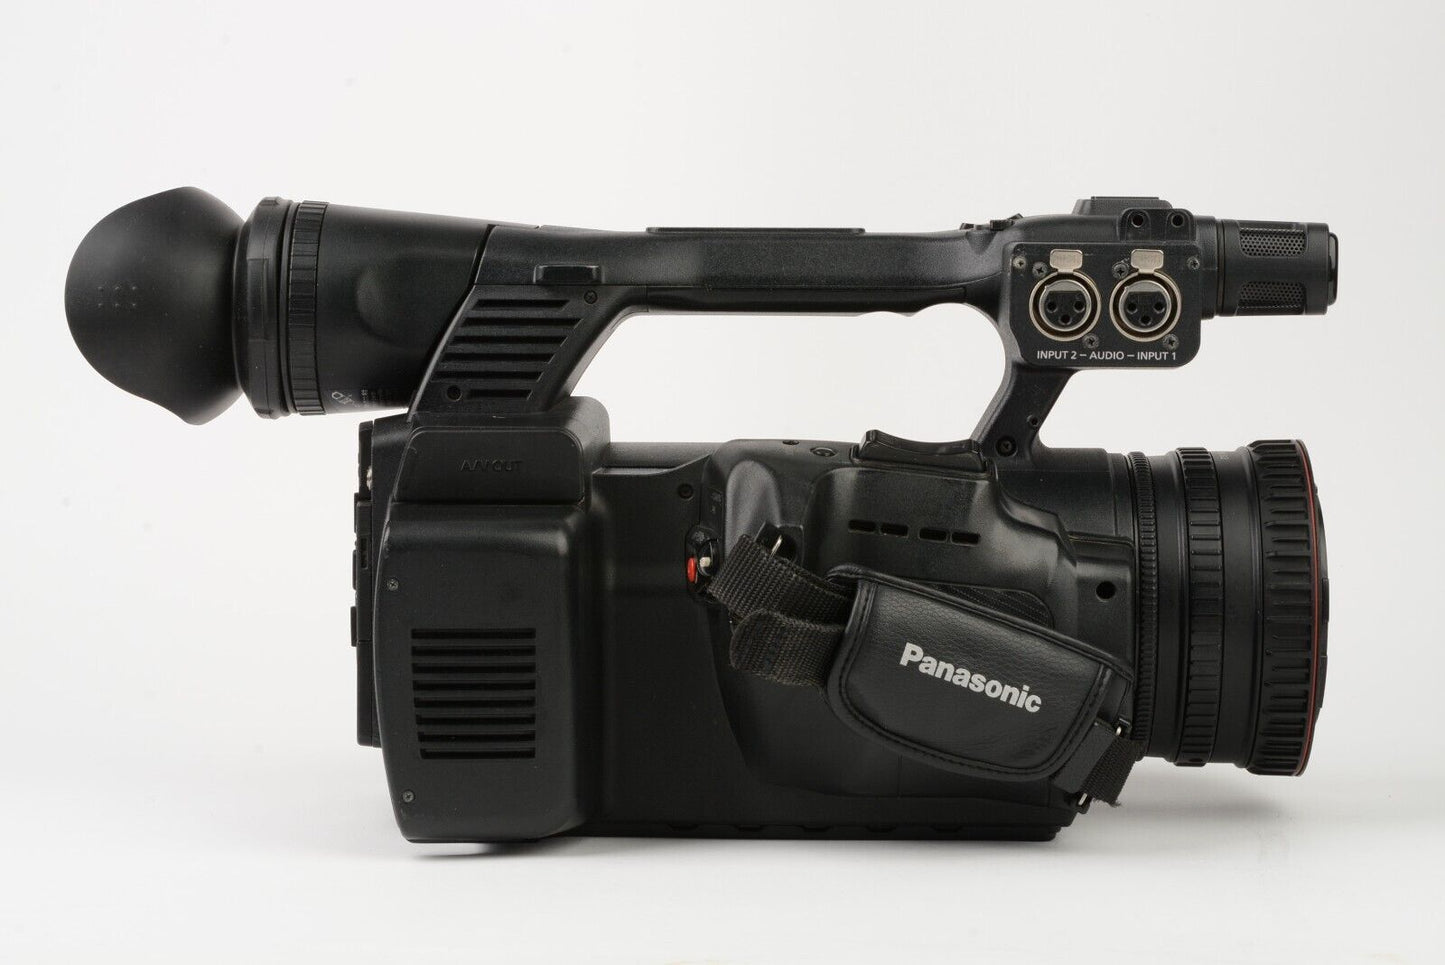 EXC++ PANASONIC AG-AC130A PRO VIDEO CAMERA, 4BATTS, CHARGER, HOOD, TESTED, GREAT